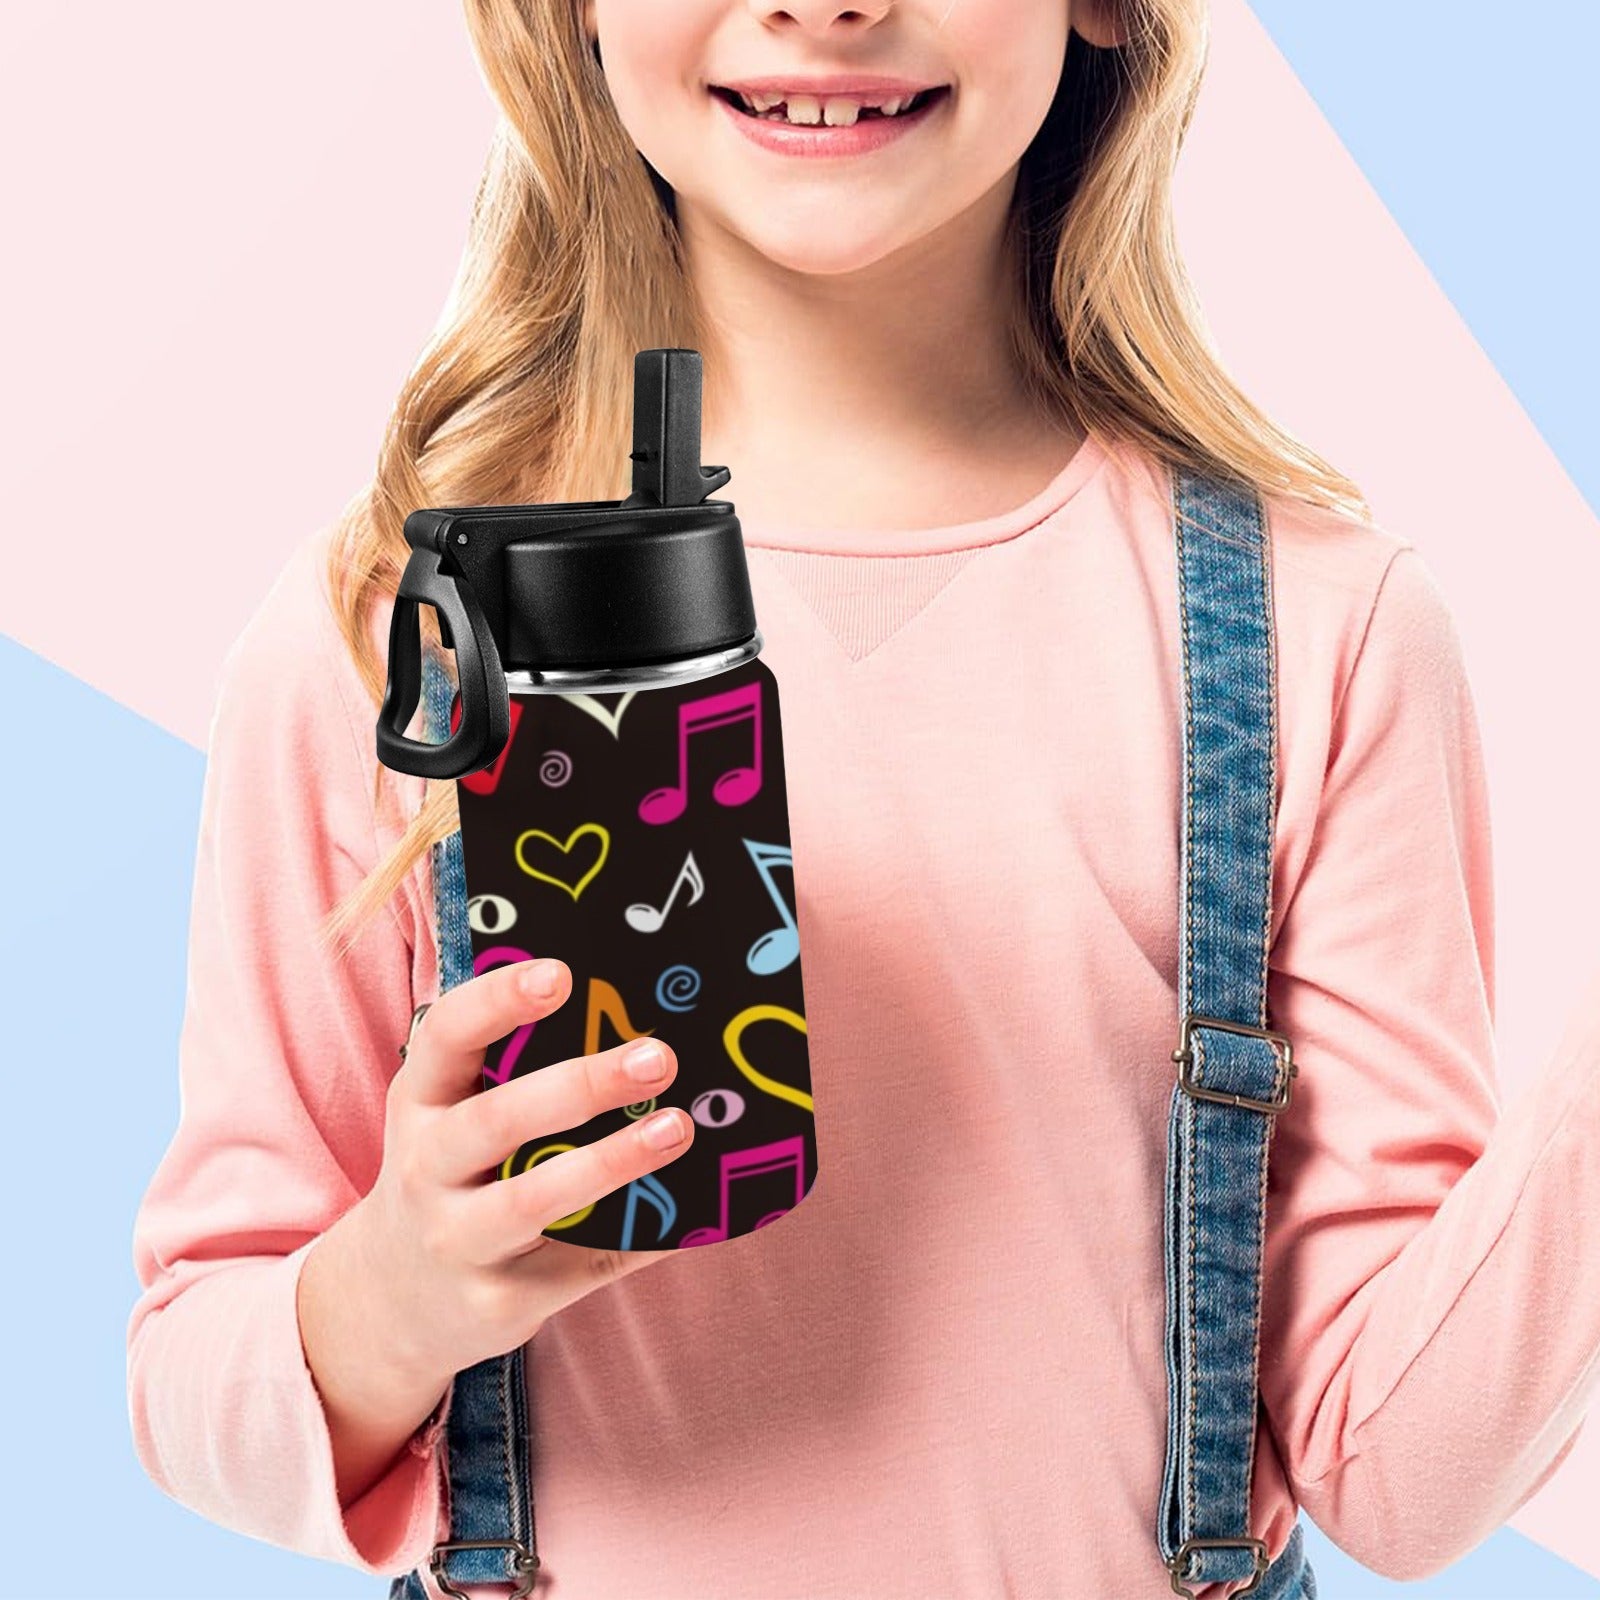 Musical Notes - Kids Water Bottle with Straw Lid (12 oz) Kids Water Bottle with Straw Lid